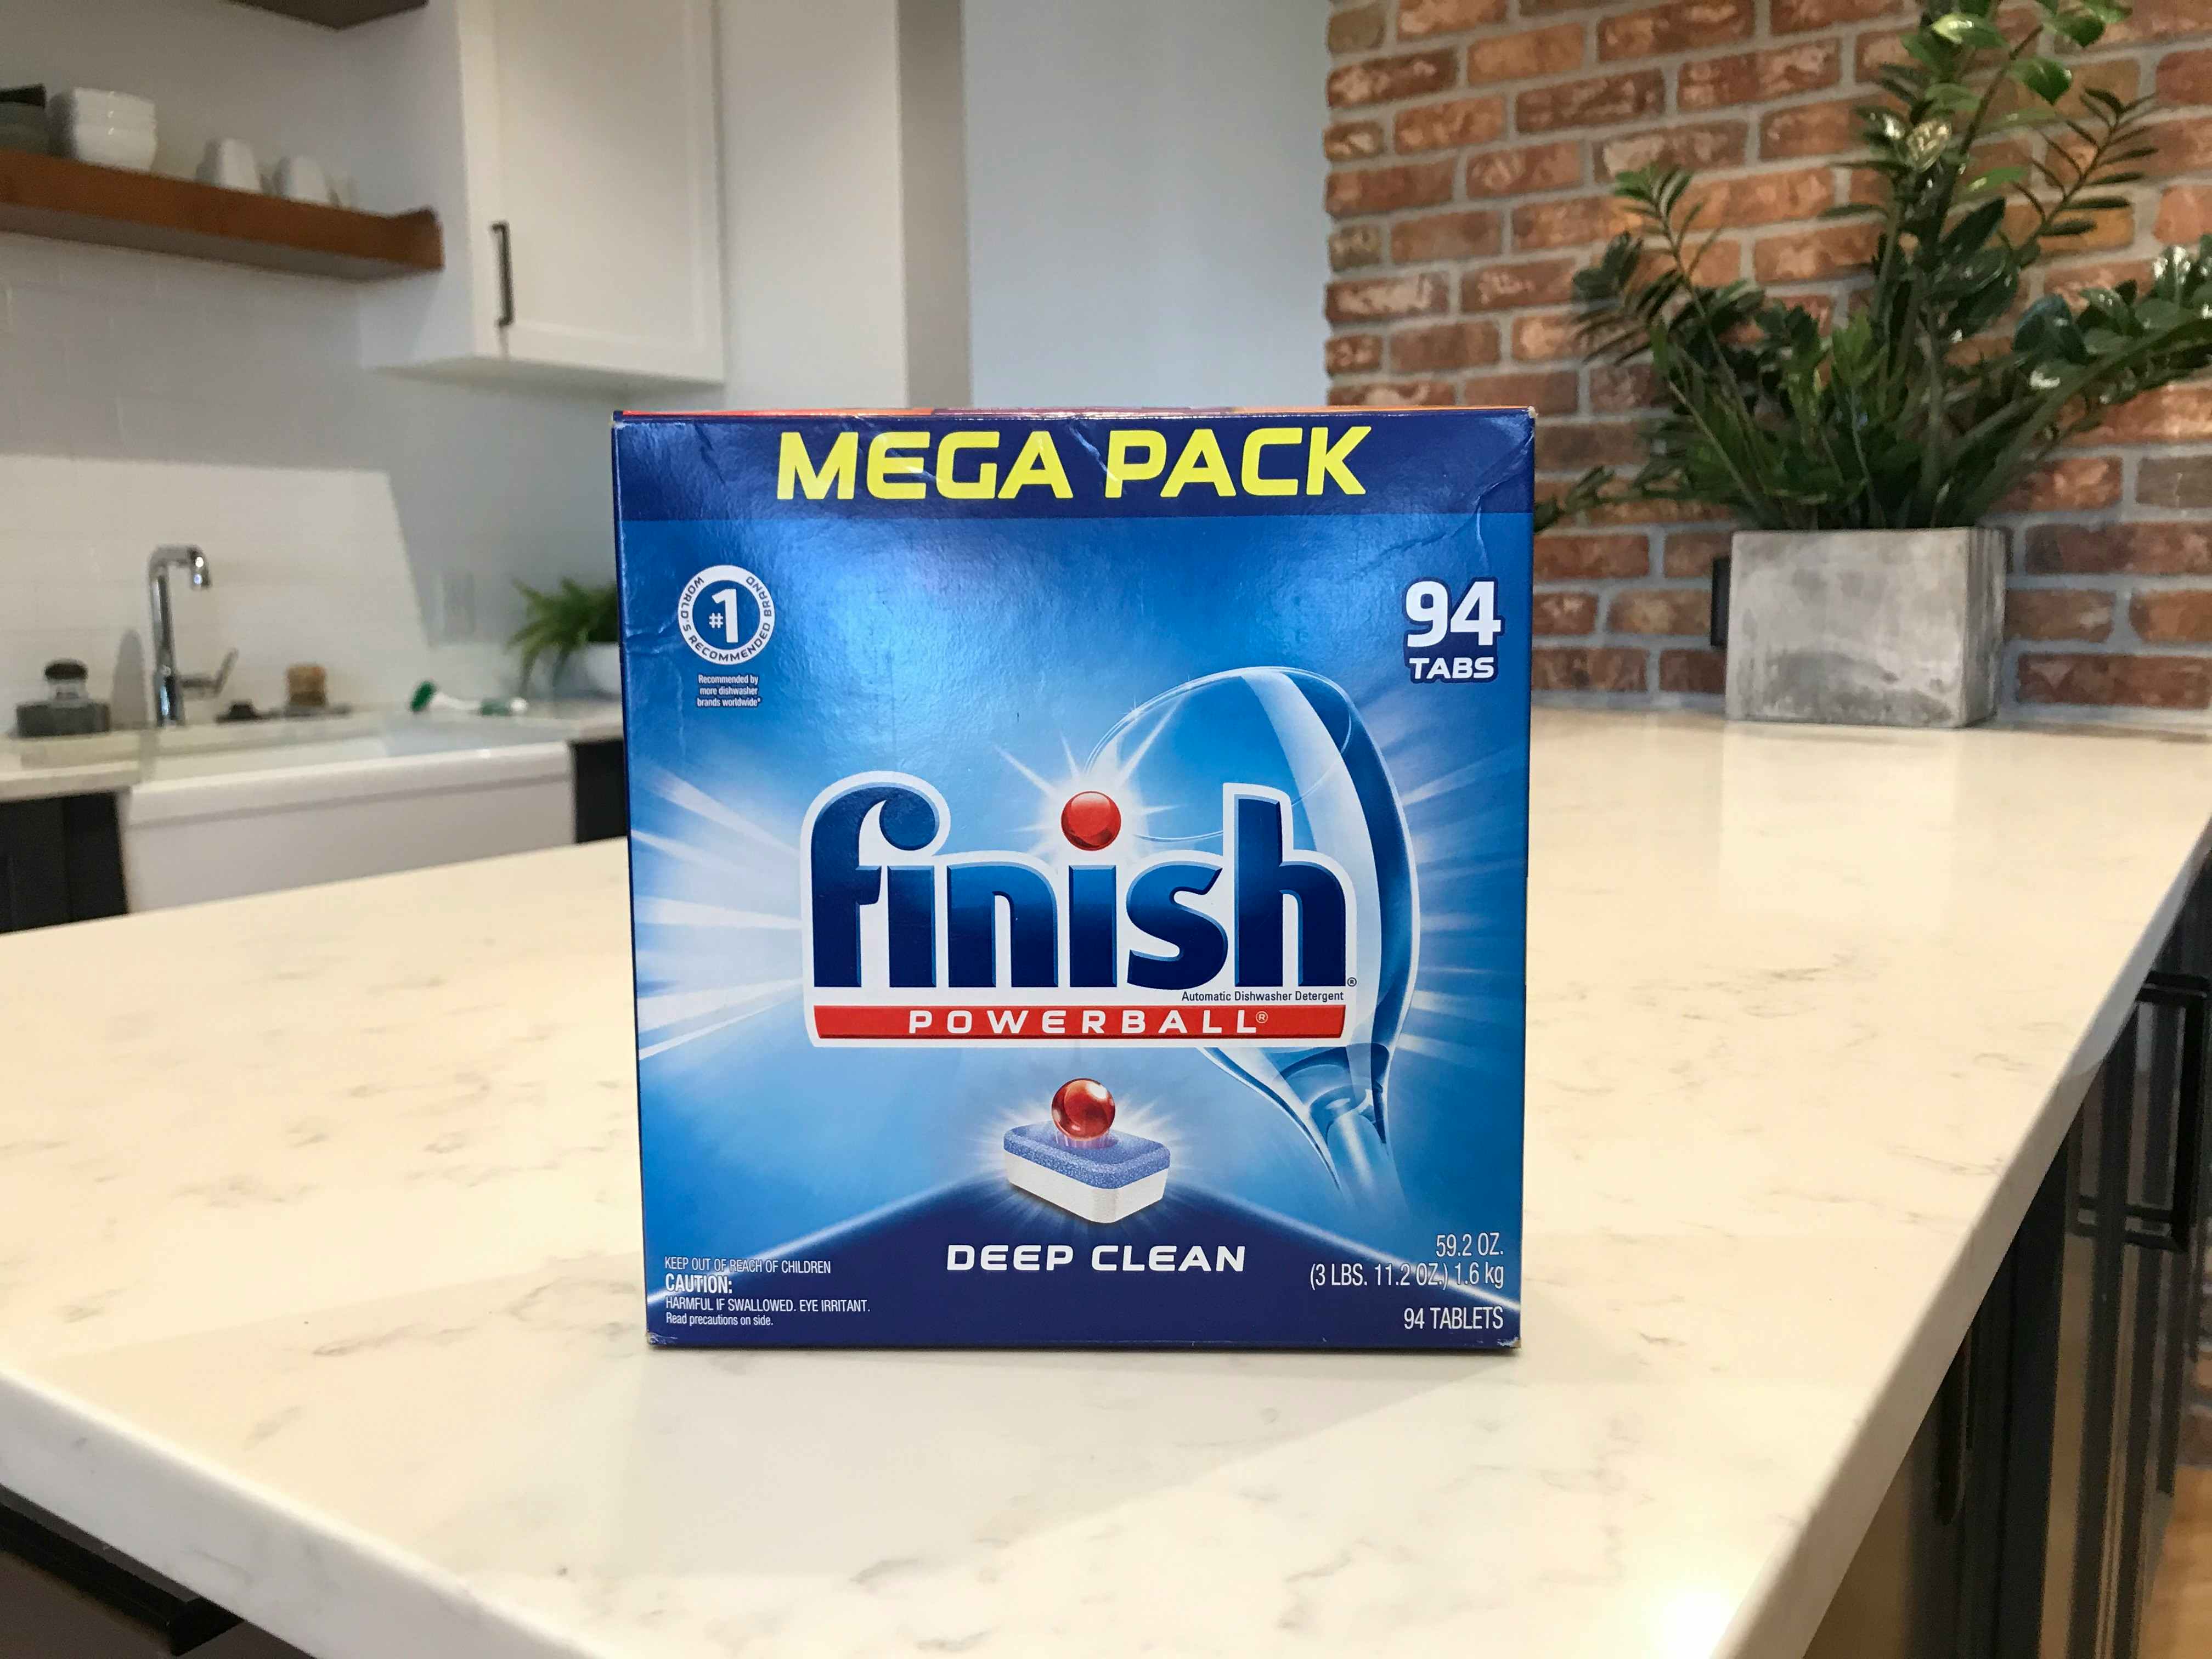 A mega pack of Finish dishwasher detergent on a table